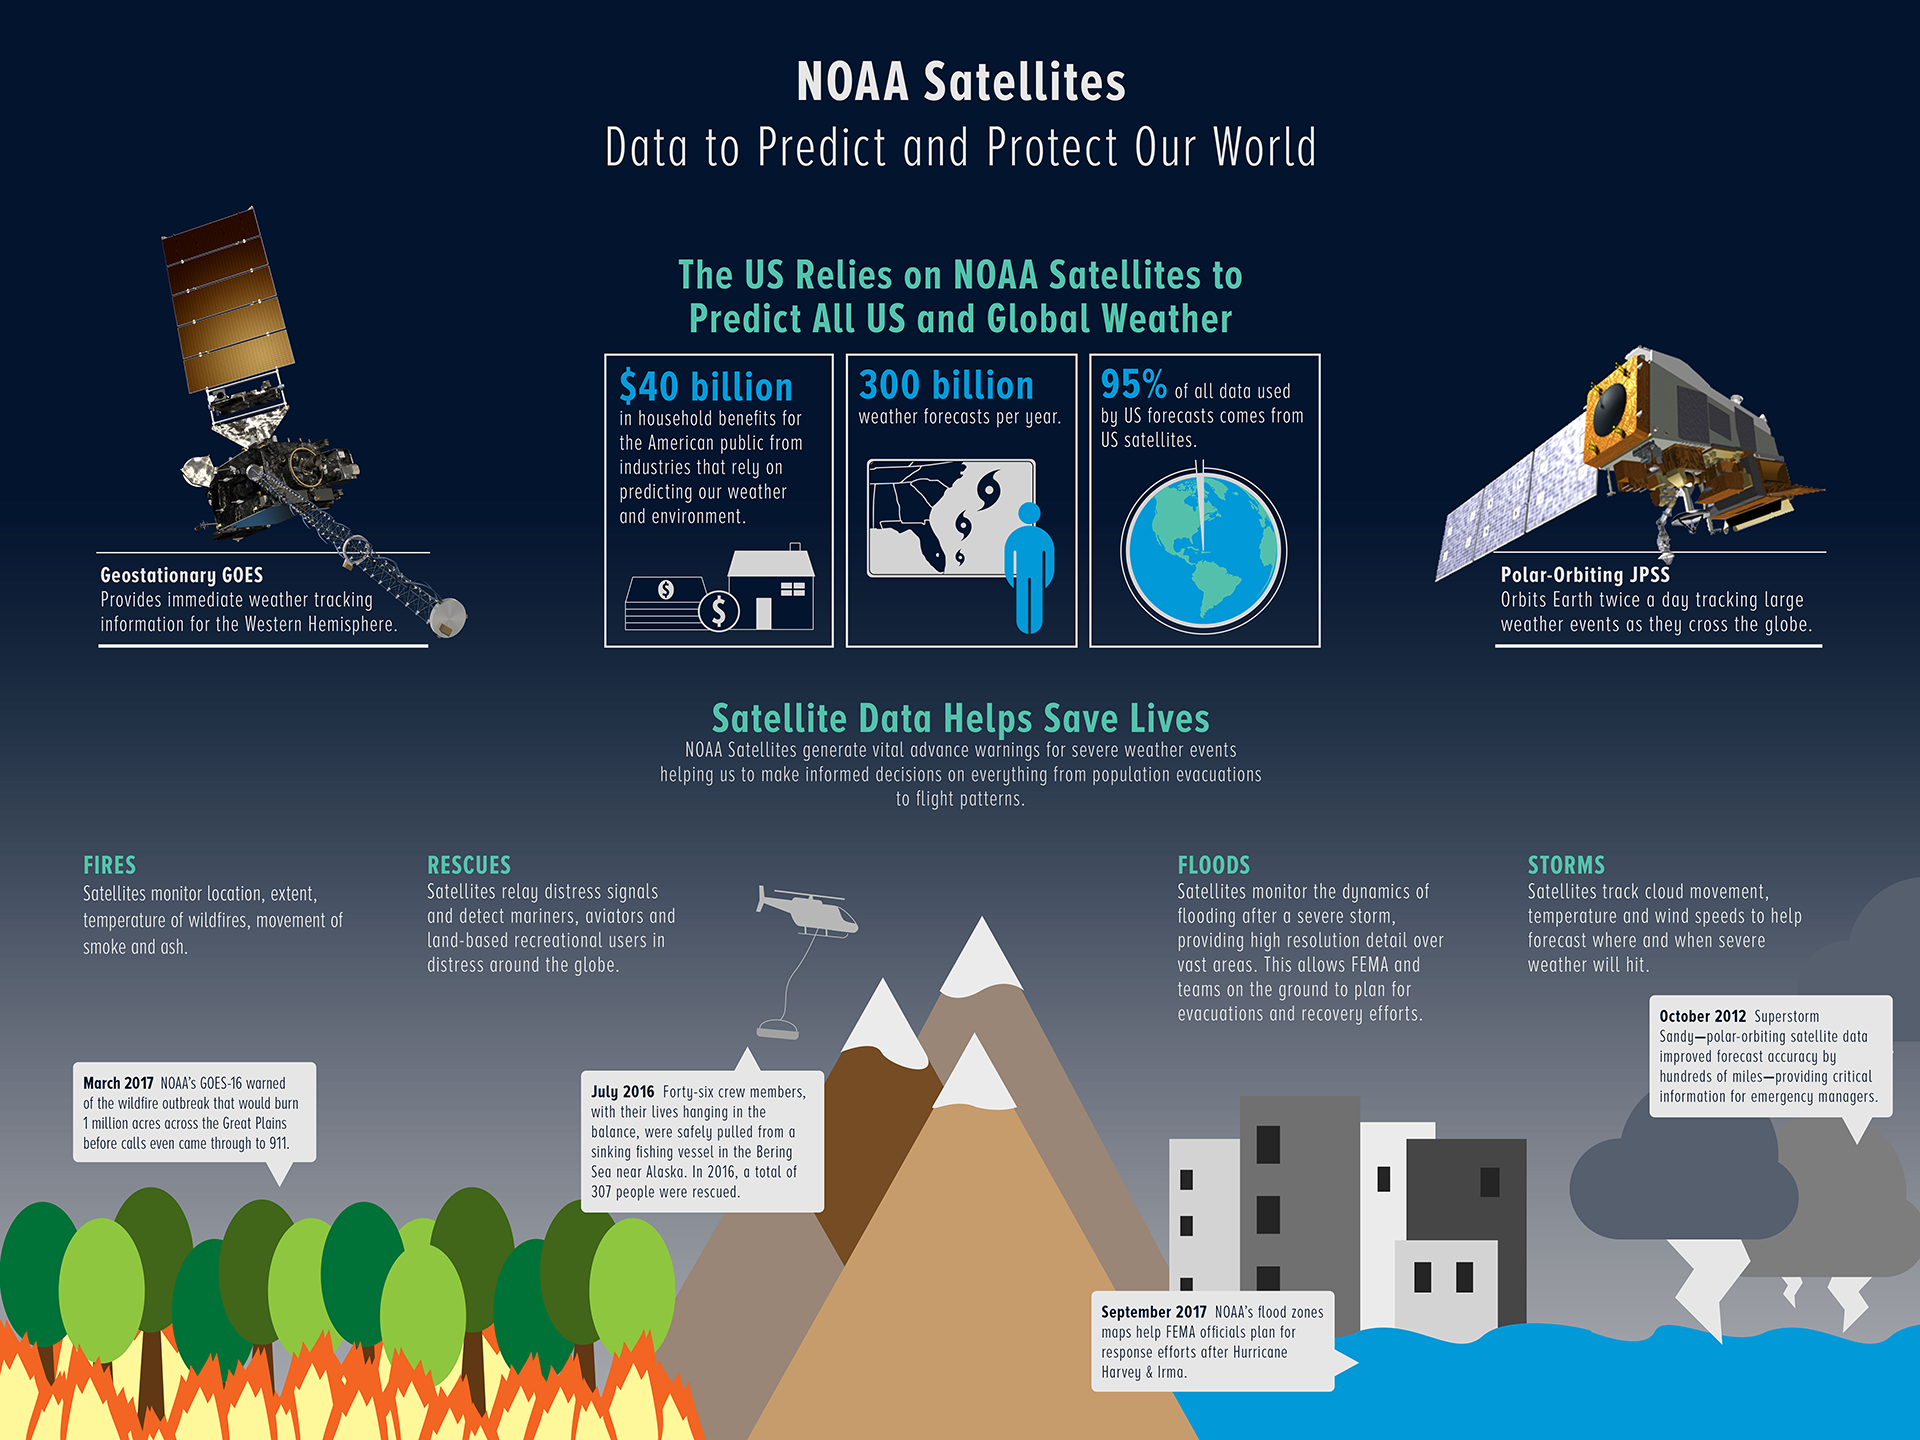 NOAA Satellites: Data to Predict and Protect our World